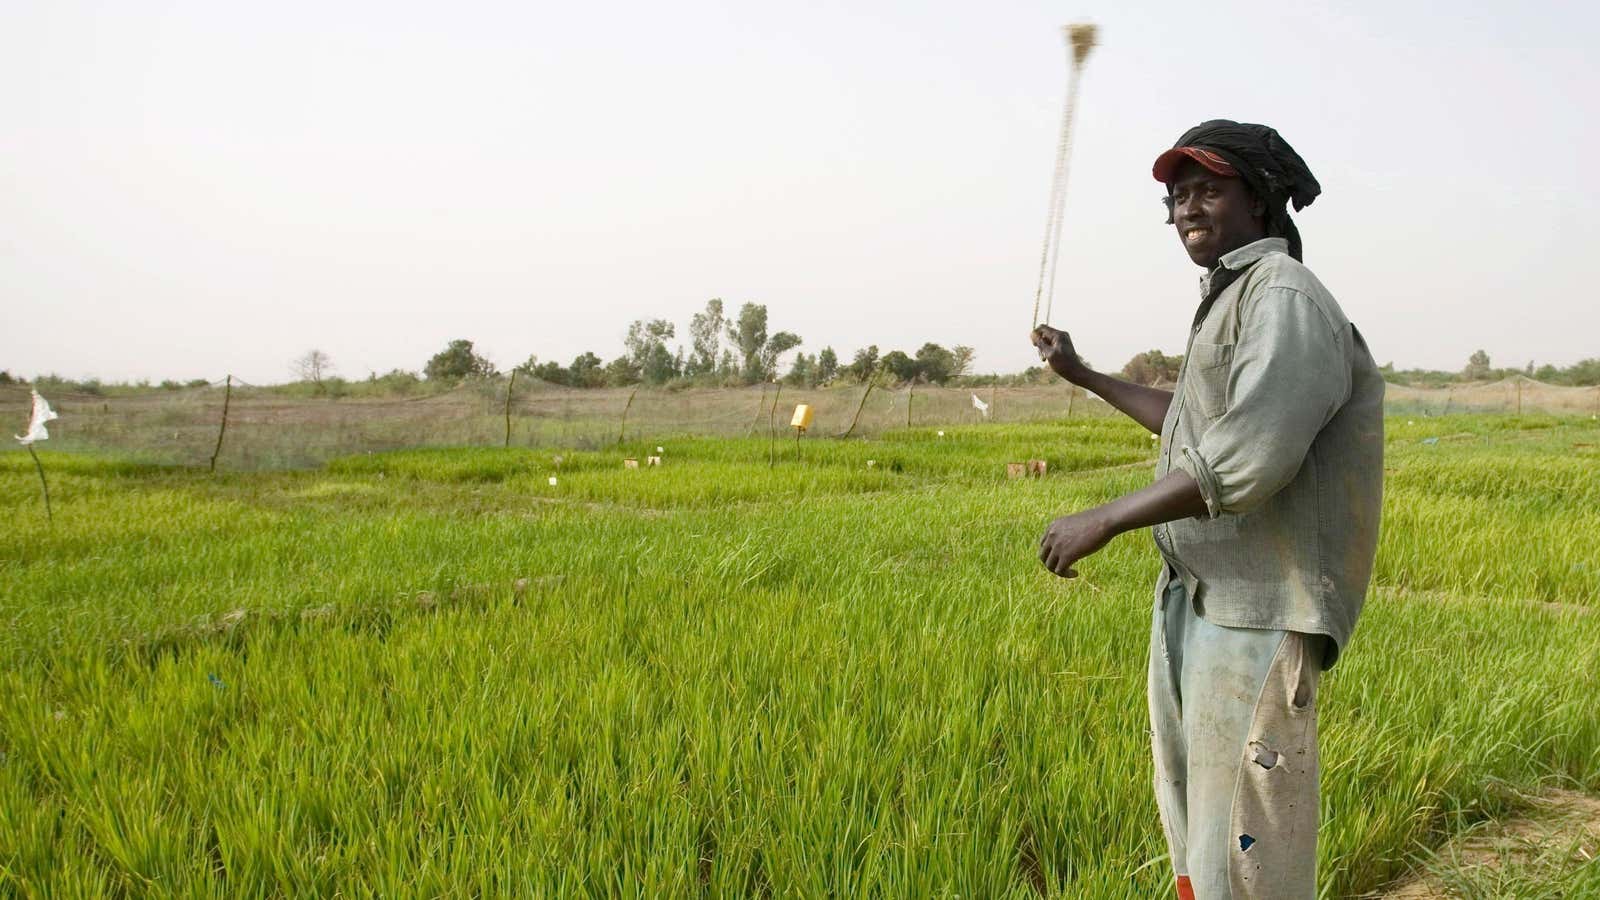 Rice farmers in Senegal may be able to diversify their crops if demand for fonio increases.